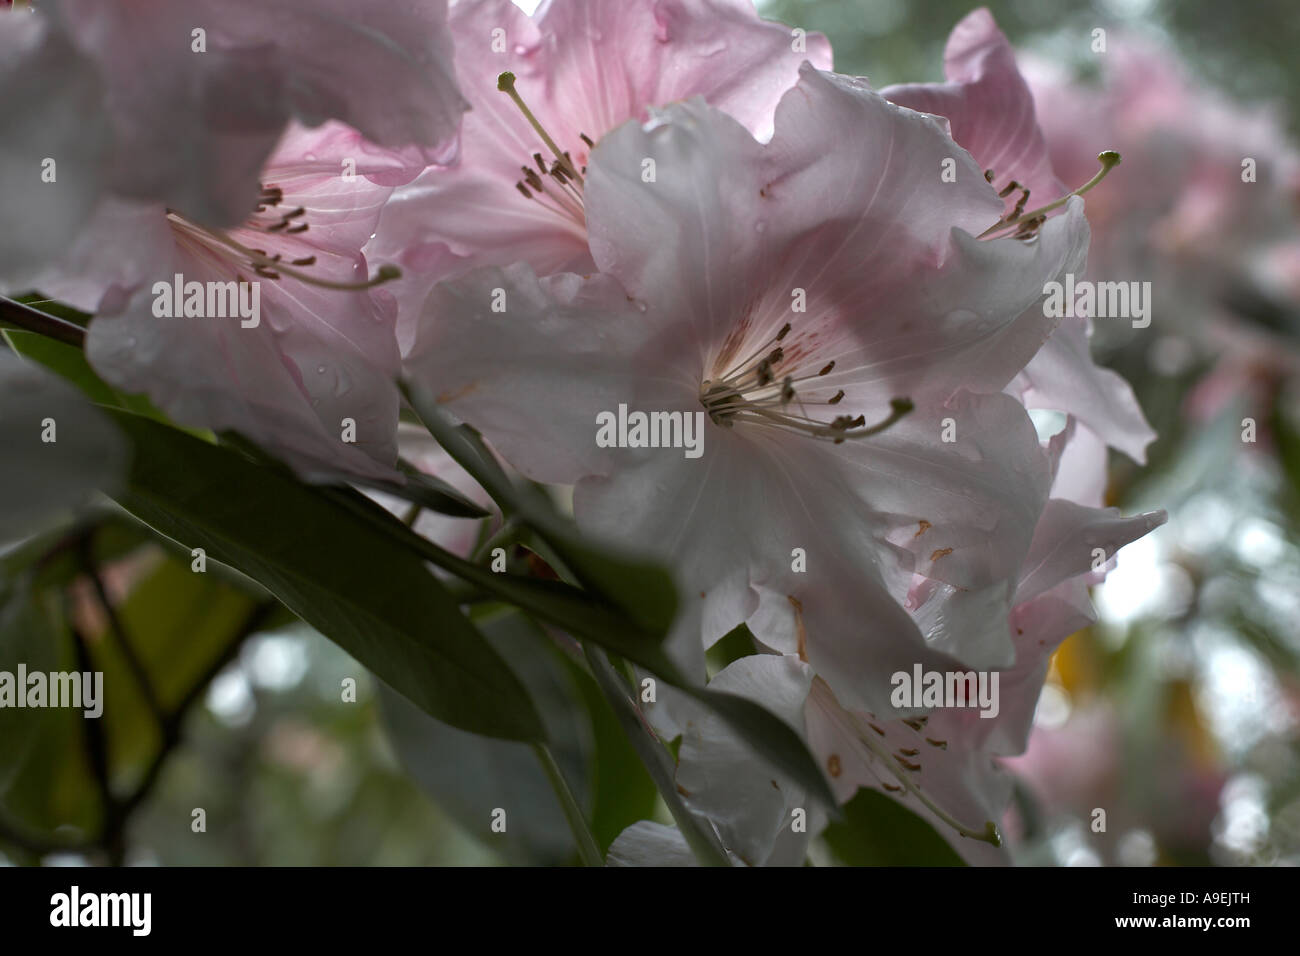 Rhododendron flower, Yorkshire Stock Photo